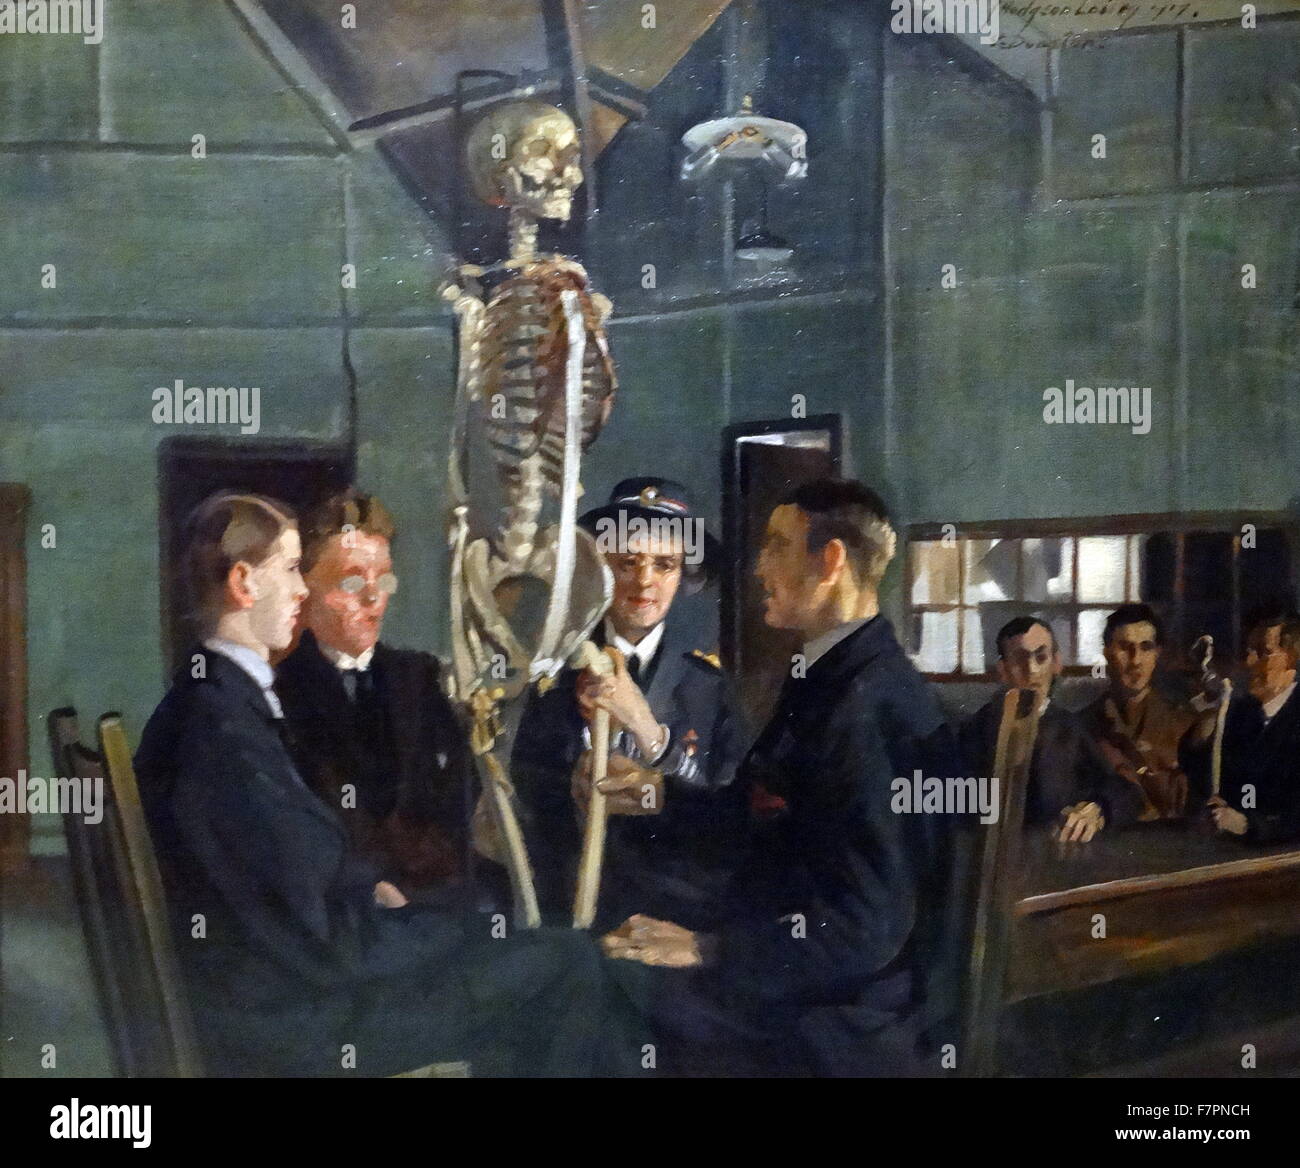 Anatomy Lessons at St. Dunstan's' by J.H. Lobley. Oil on canvas, British, 1919. St. Dunstan's was founded in order to rehabilitate those who were blinded during active service in the First World War. Stock Photo